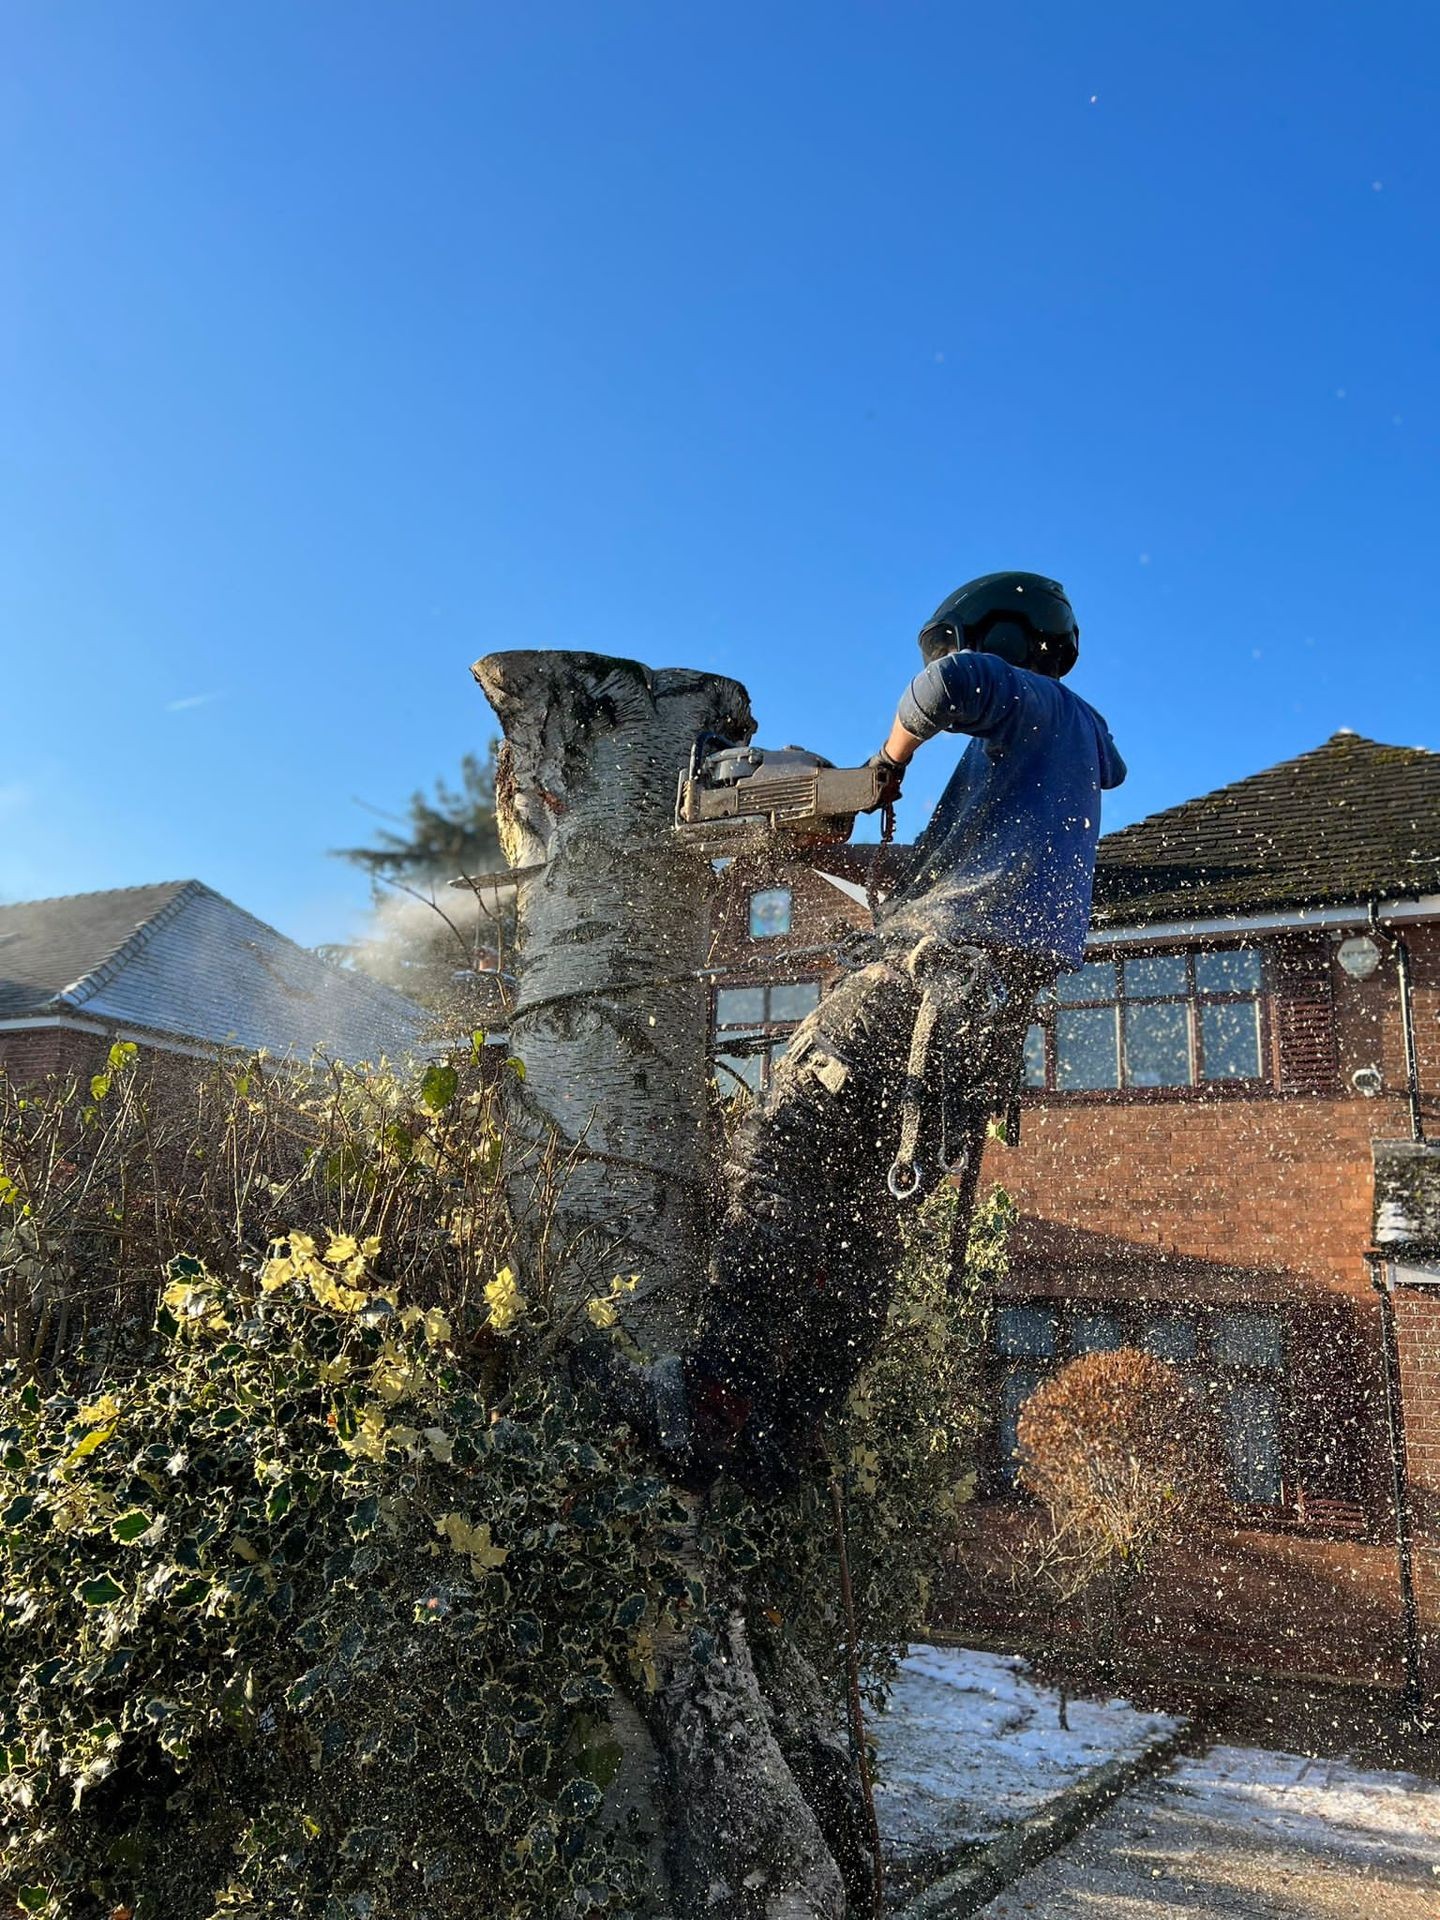 Professional tree surgeon in Altrincham, Cheshire, using a chainsaw to expertly cut down a tree. Our team at Hassell Tree specialises in safe and skilled tree removal services.